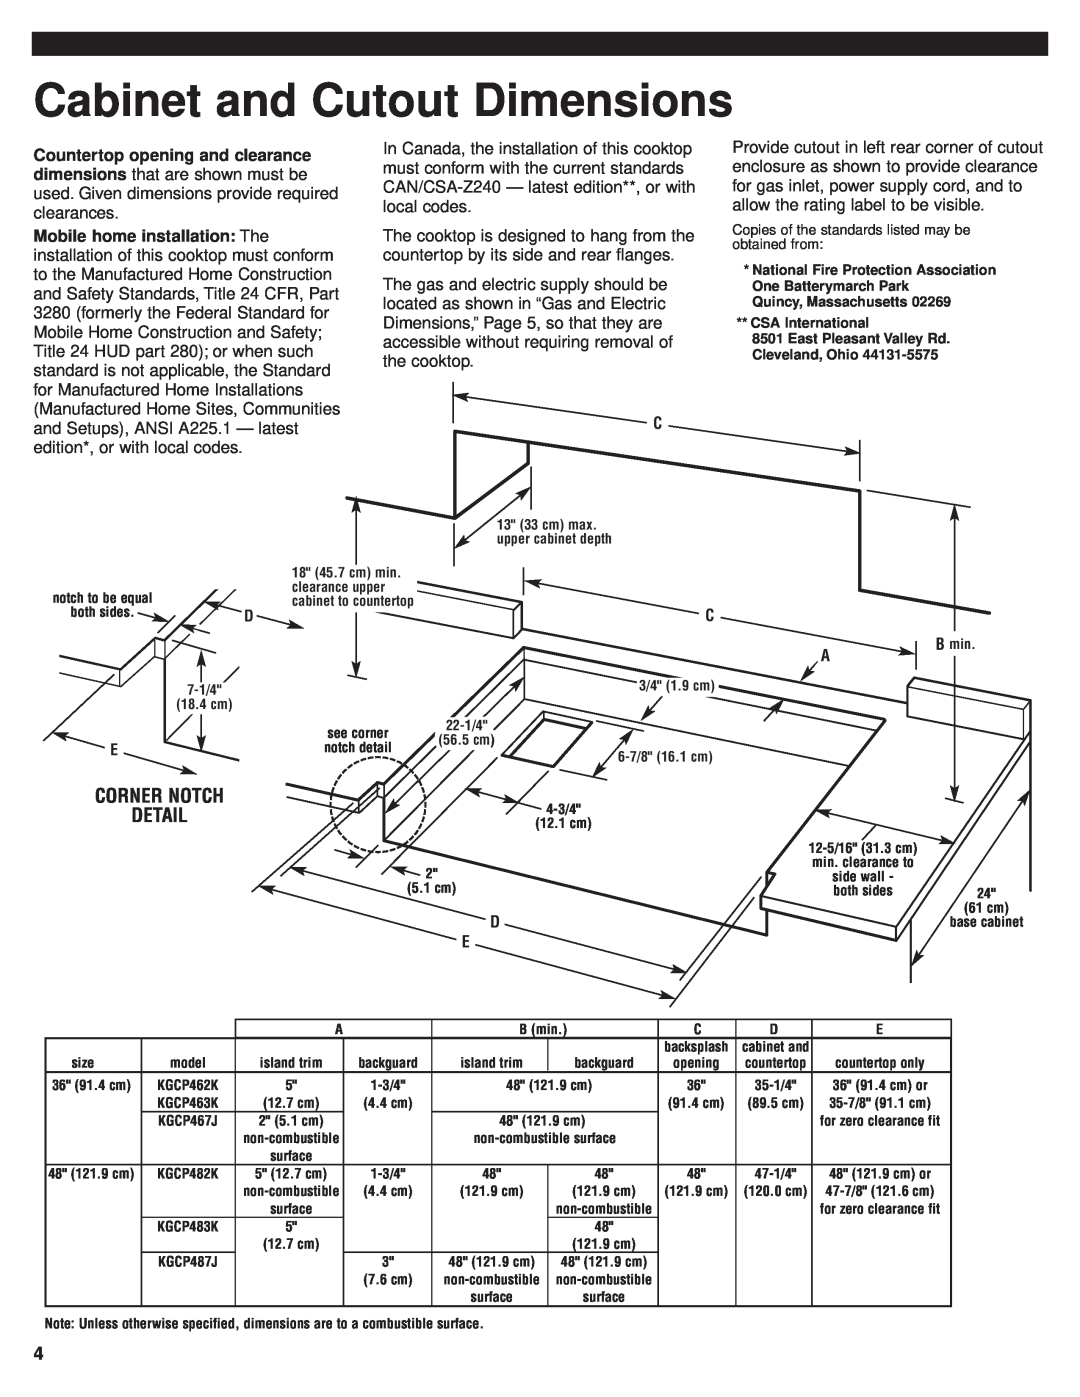 KitchenAid 8284908 installation instructions Cabinet and Cutout Dimensions 